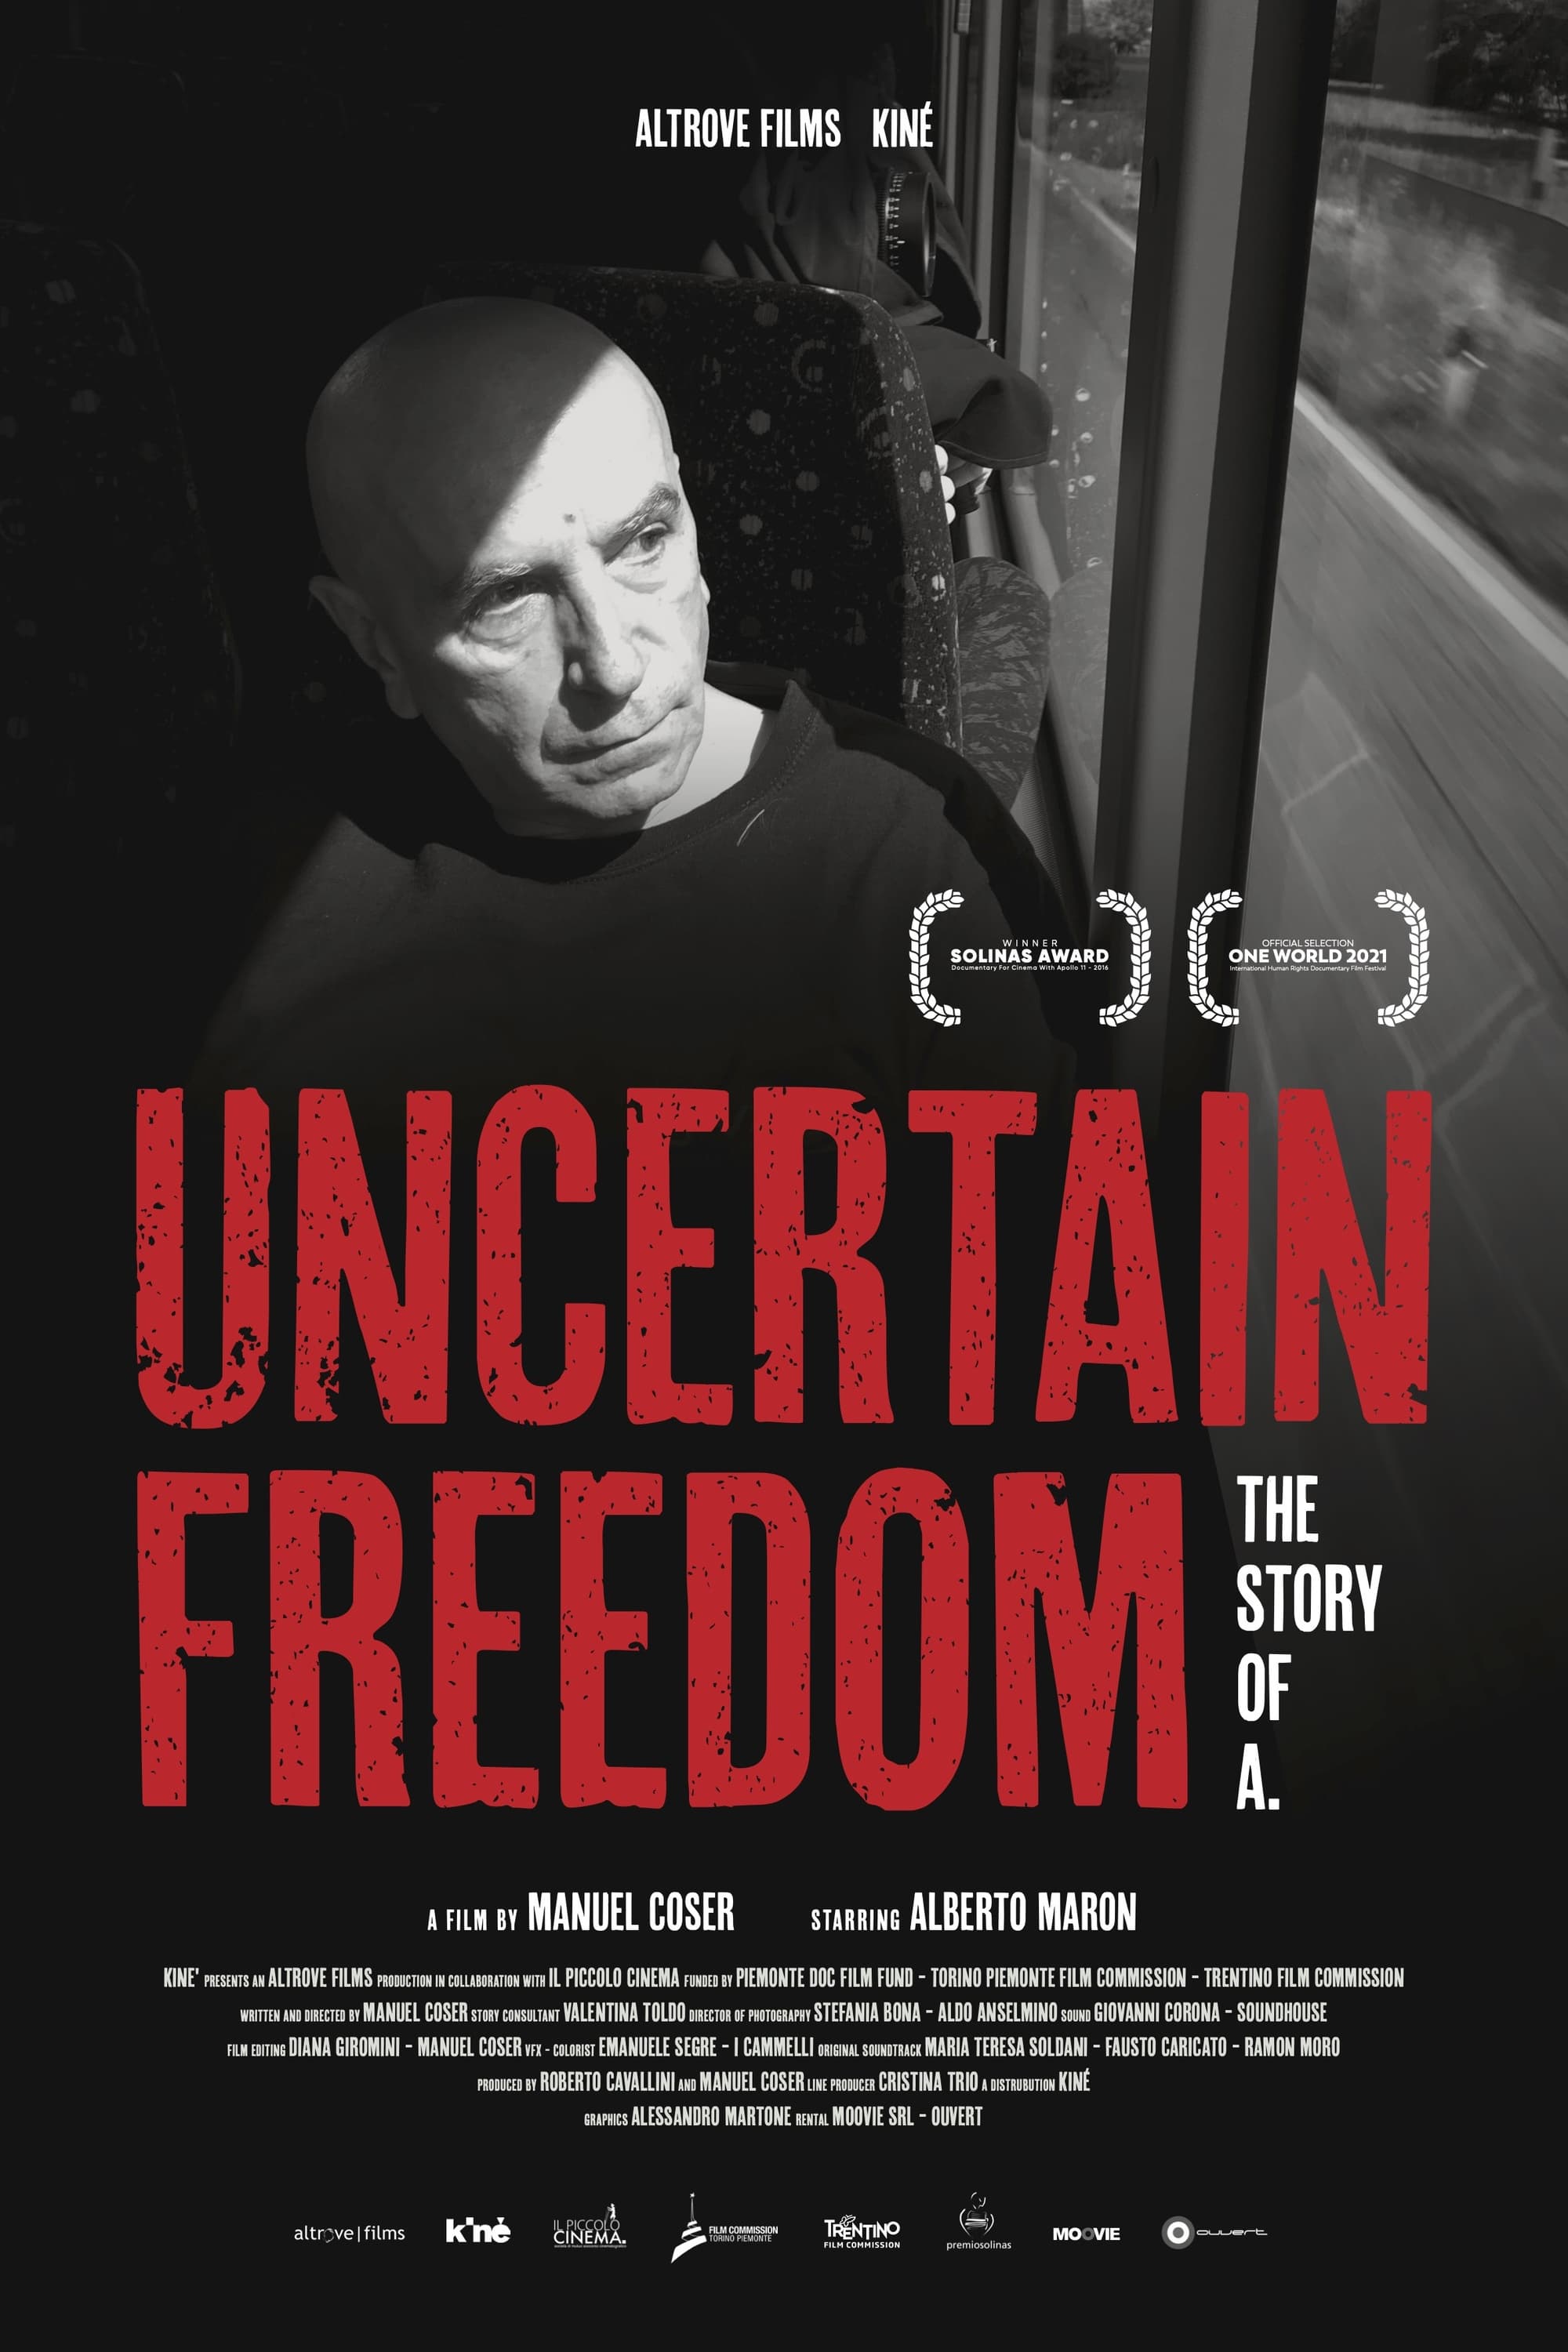 Uncertain freedom: the story of A.